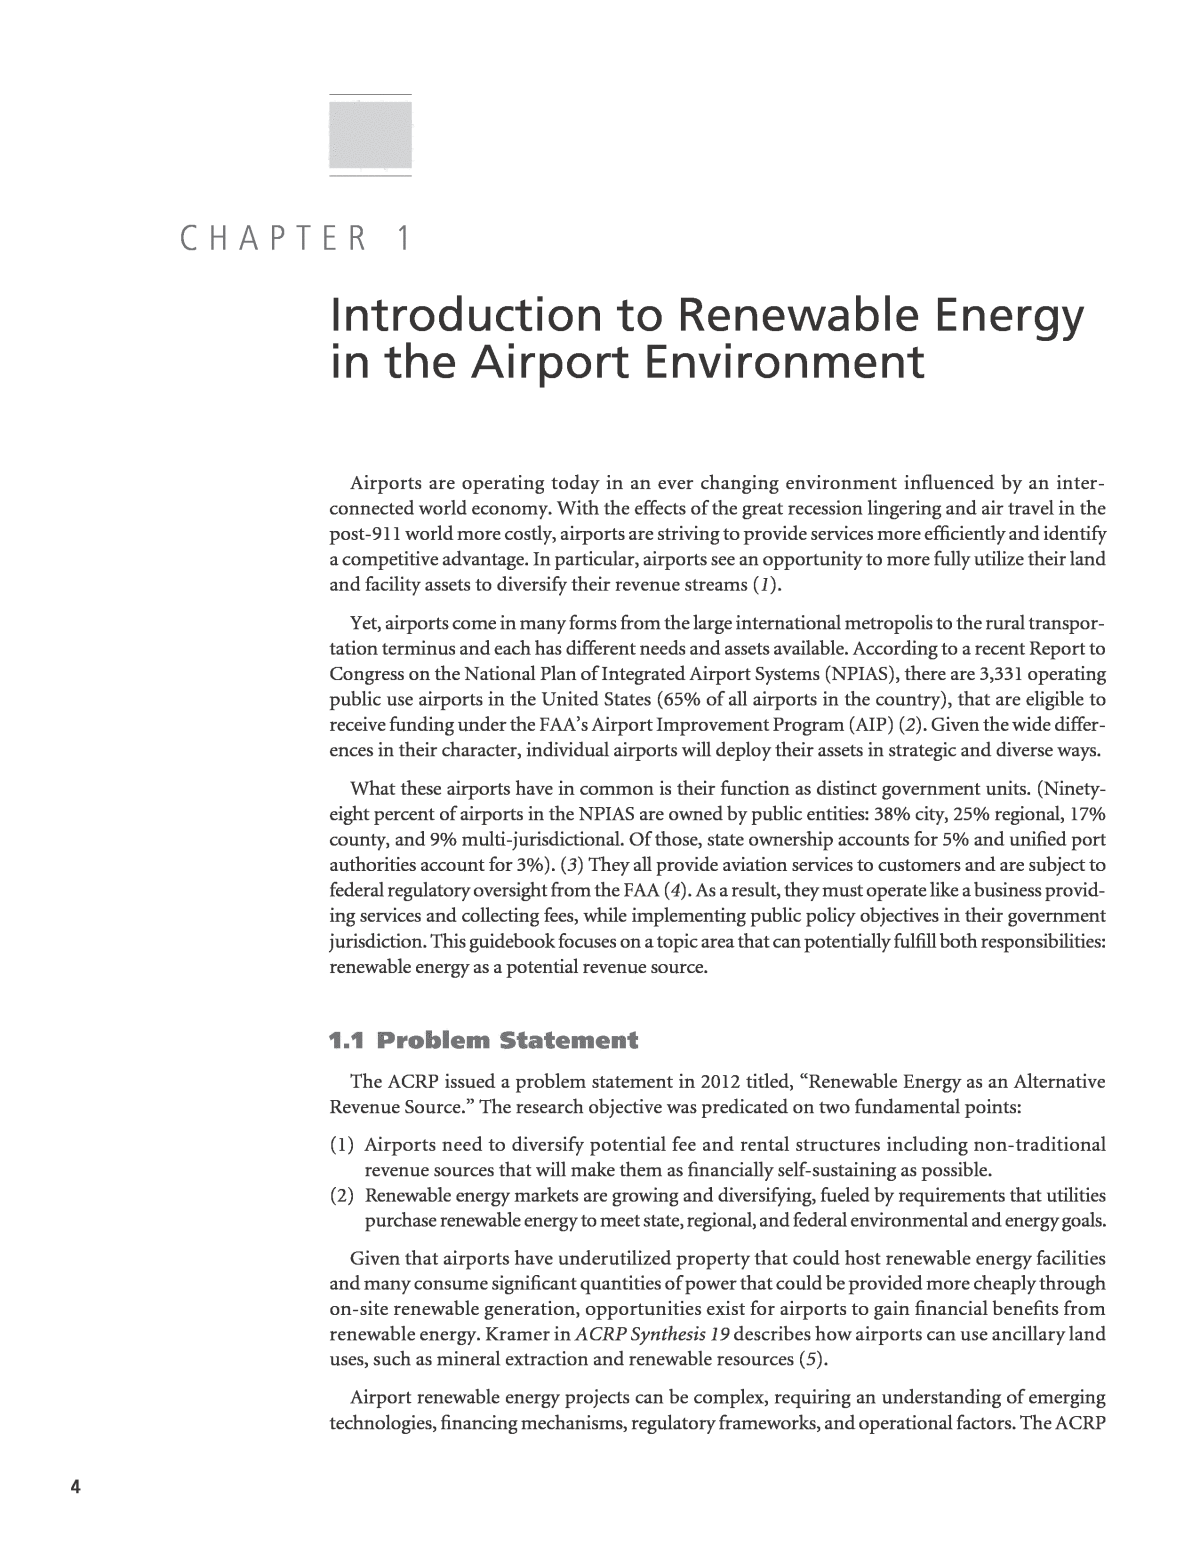 Chapter 1 - Introduction to Renewable Energy in the Airport Environment, Renewable  Energy as an Airport Revenue Source